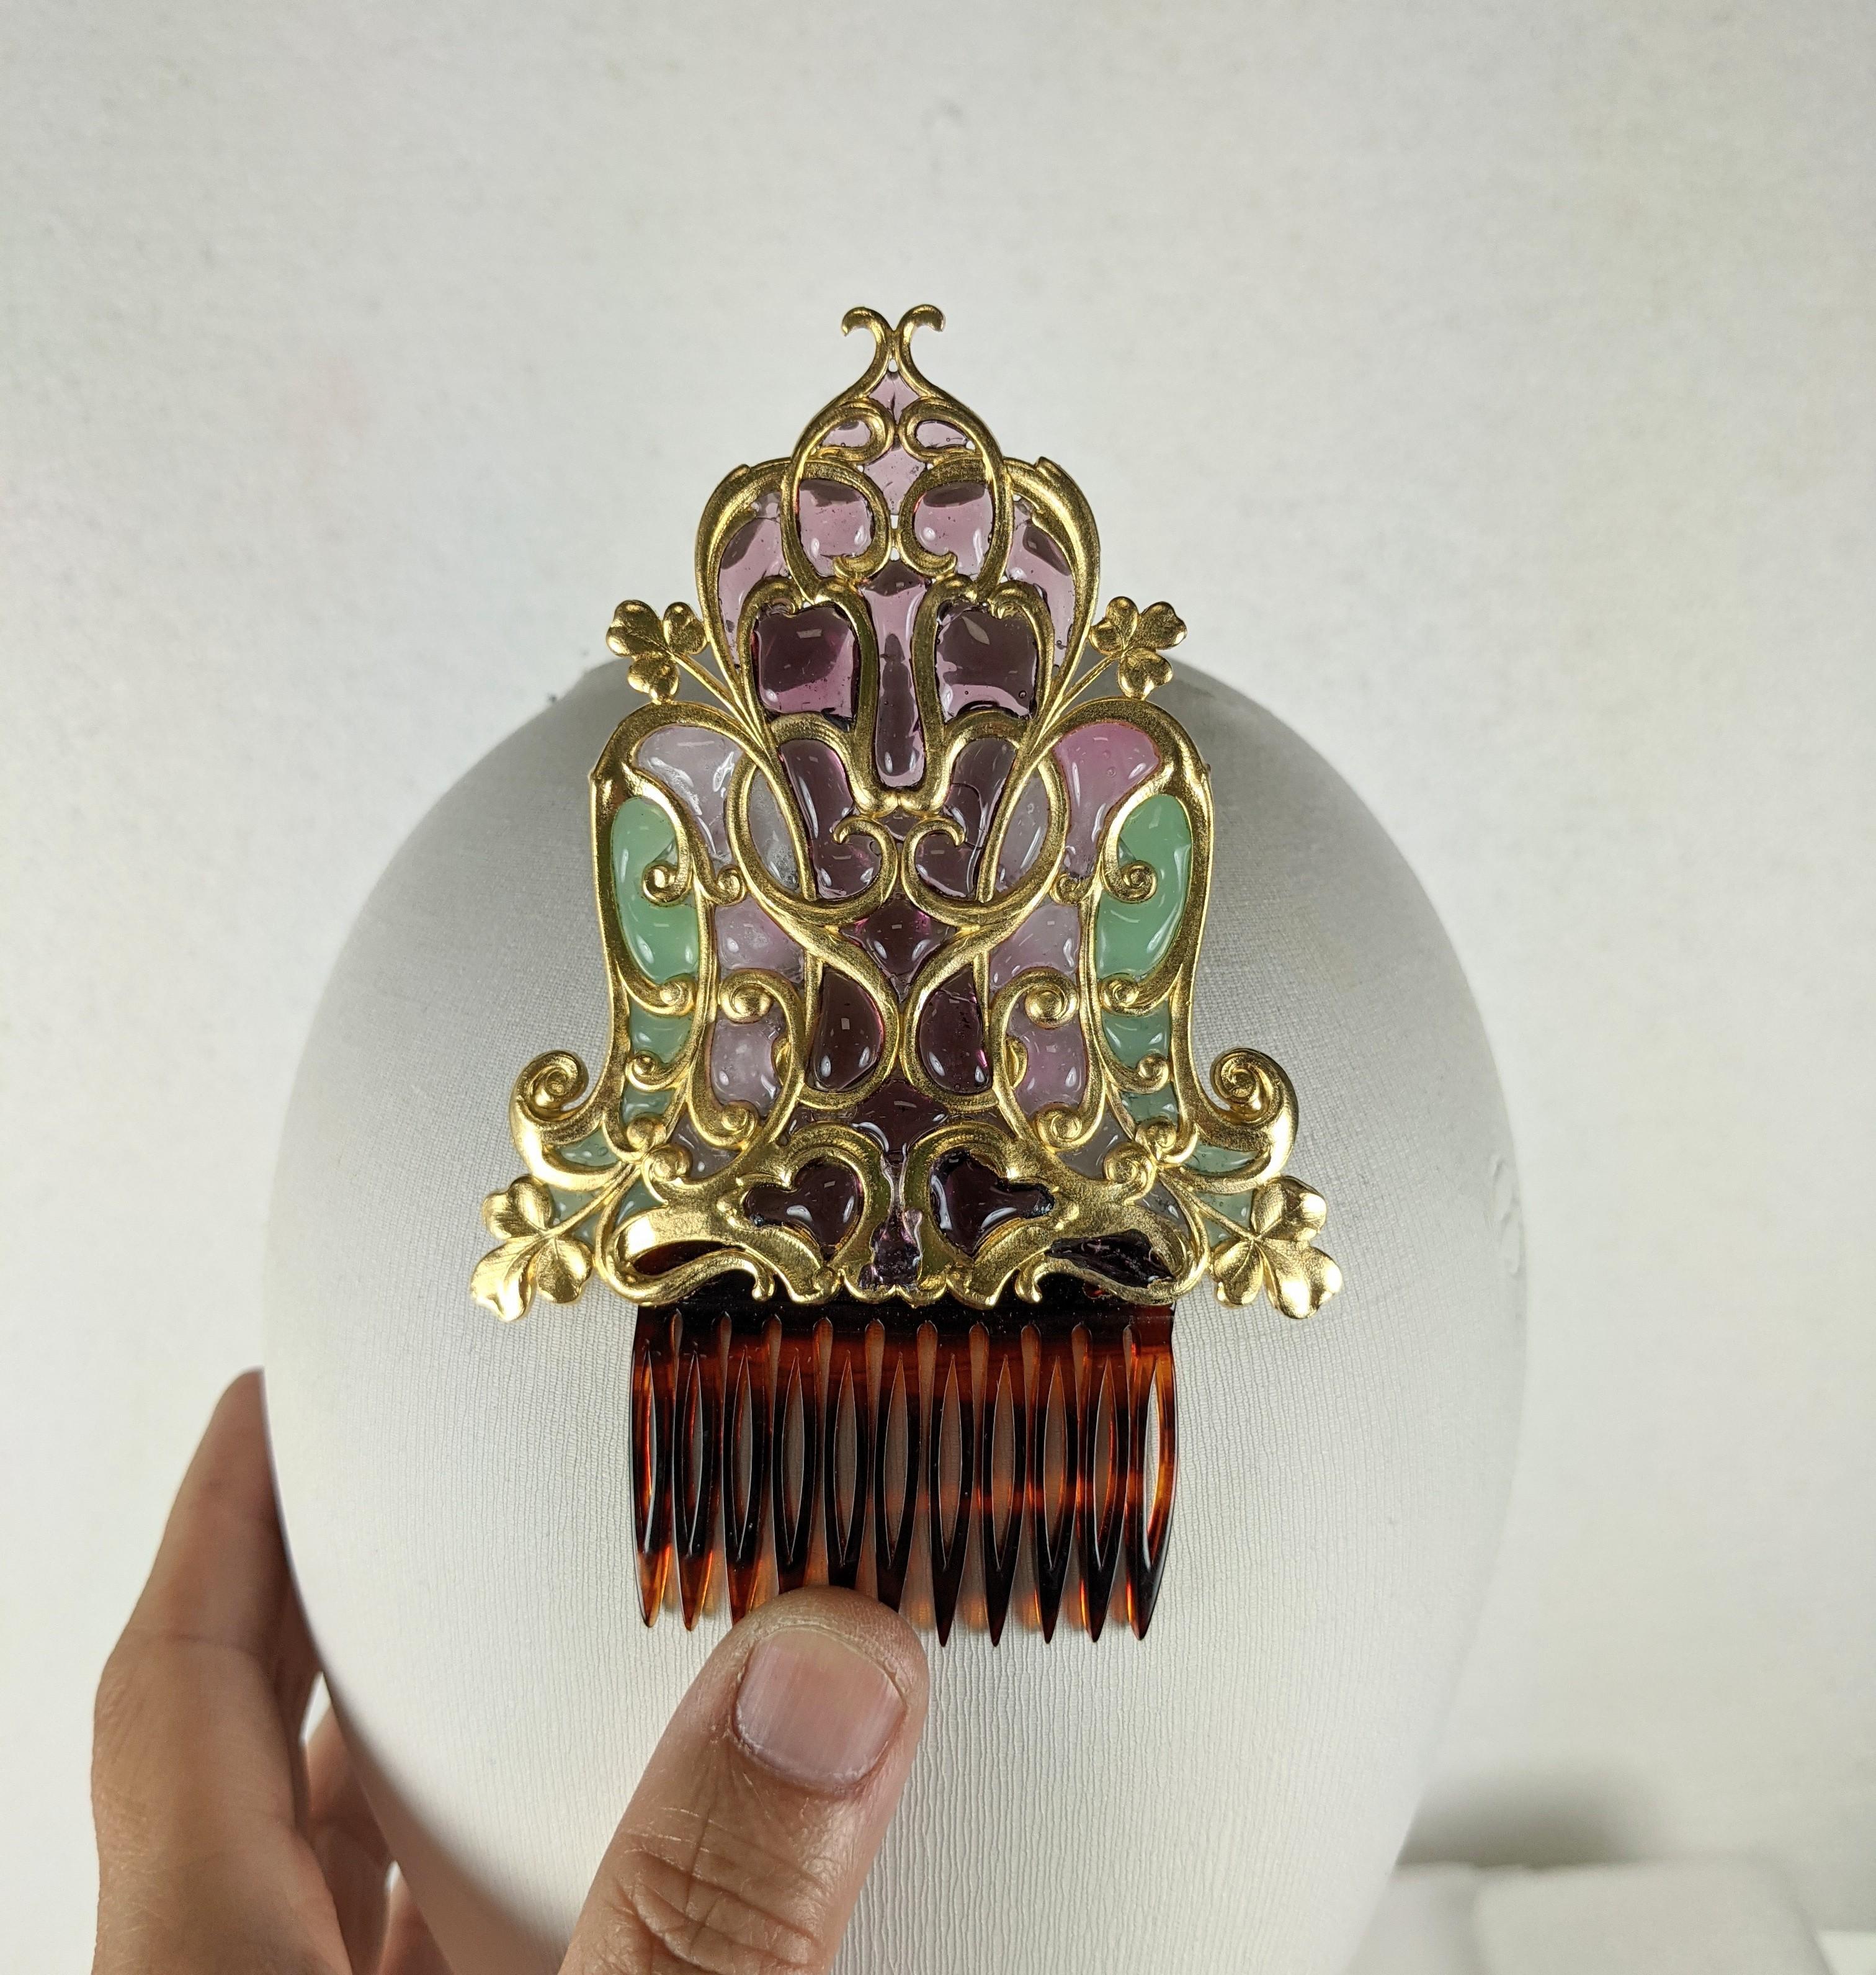 Art Nouveau Poured Glass Plique Comb from the 1900's. Large art Nouveau clover motif bronze frame with pate de verre enamel accents throughout. 
Designed to be worn high in the hair for the light to shine through the glass panels. 
1900 France.